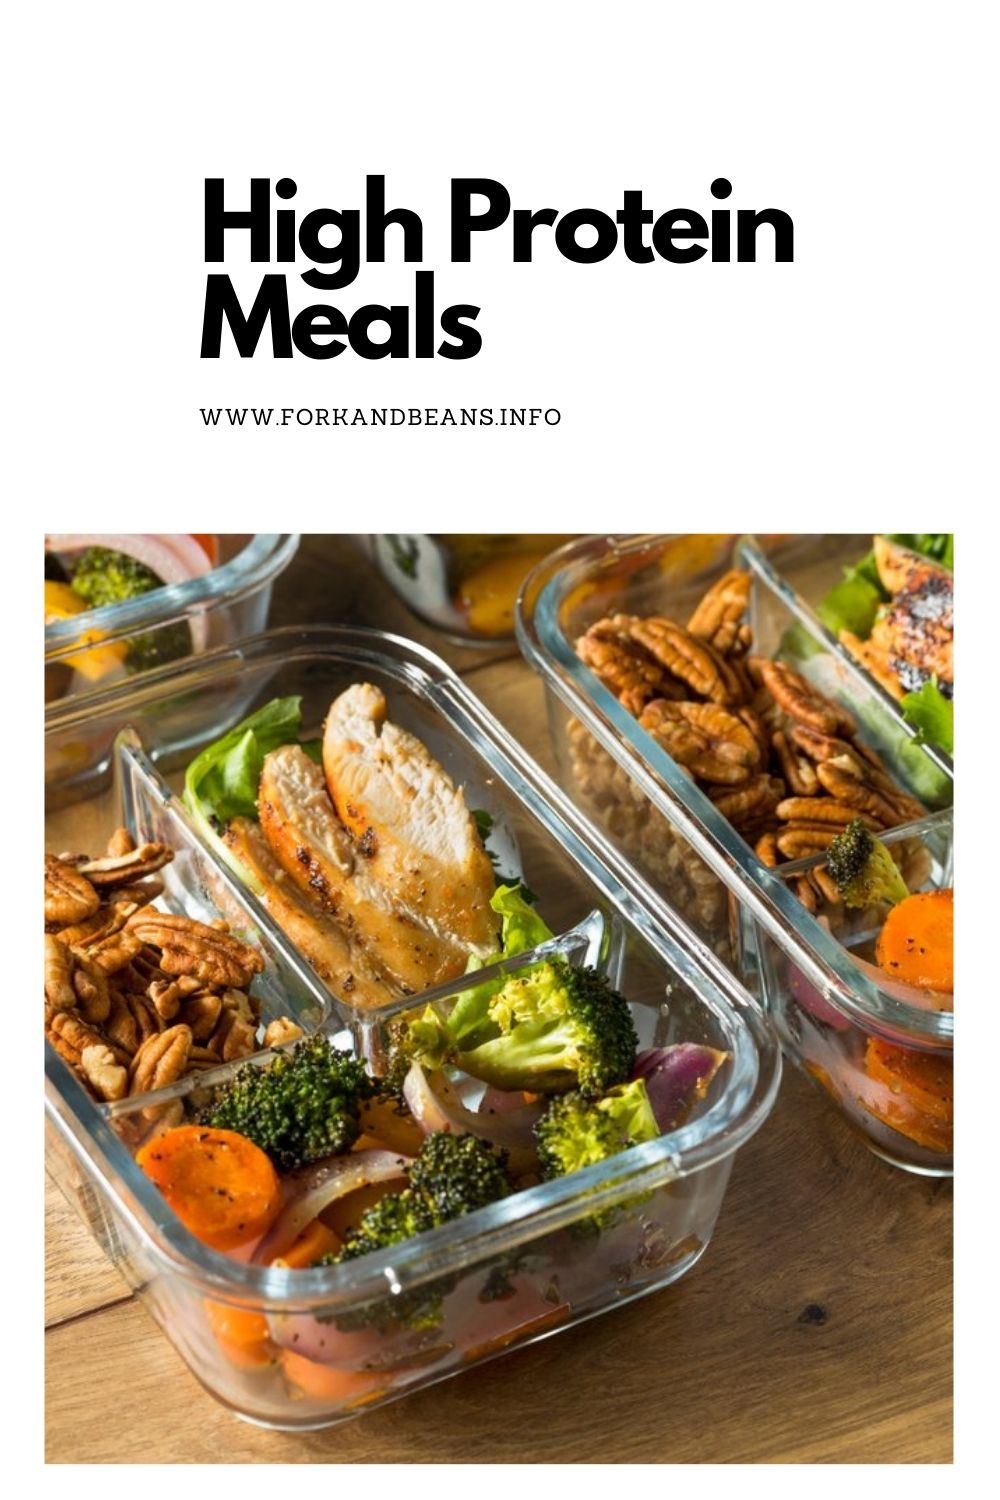 Meal Prep Made Easy: High Protein Meal Ideas